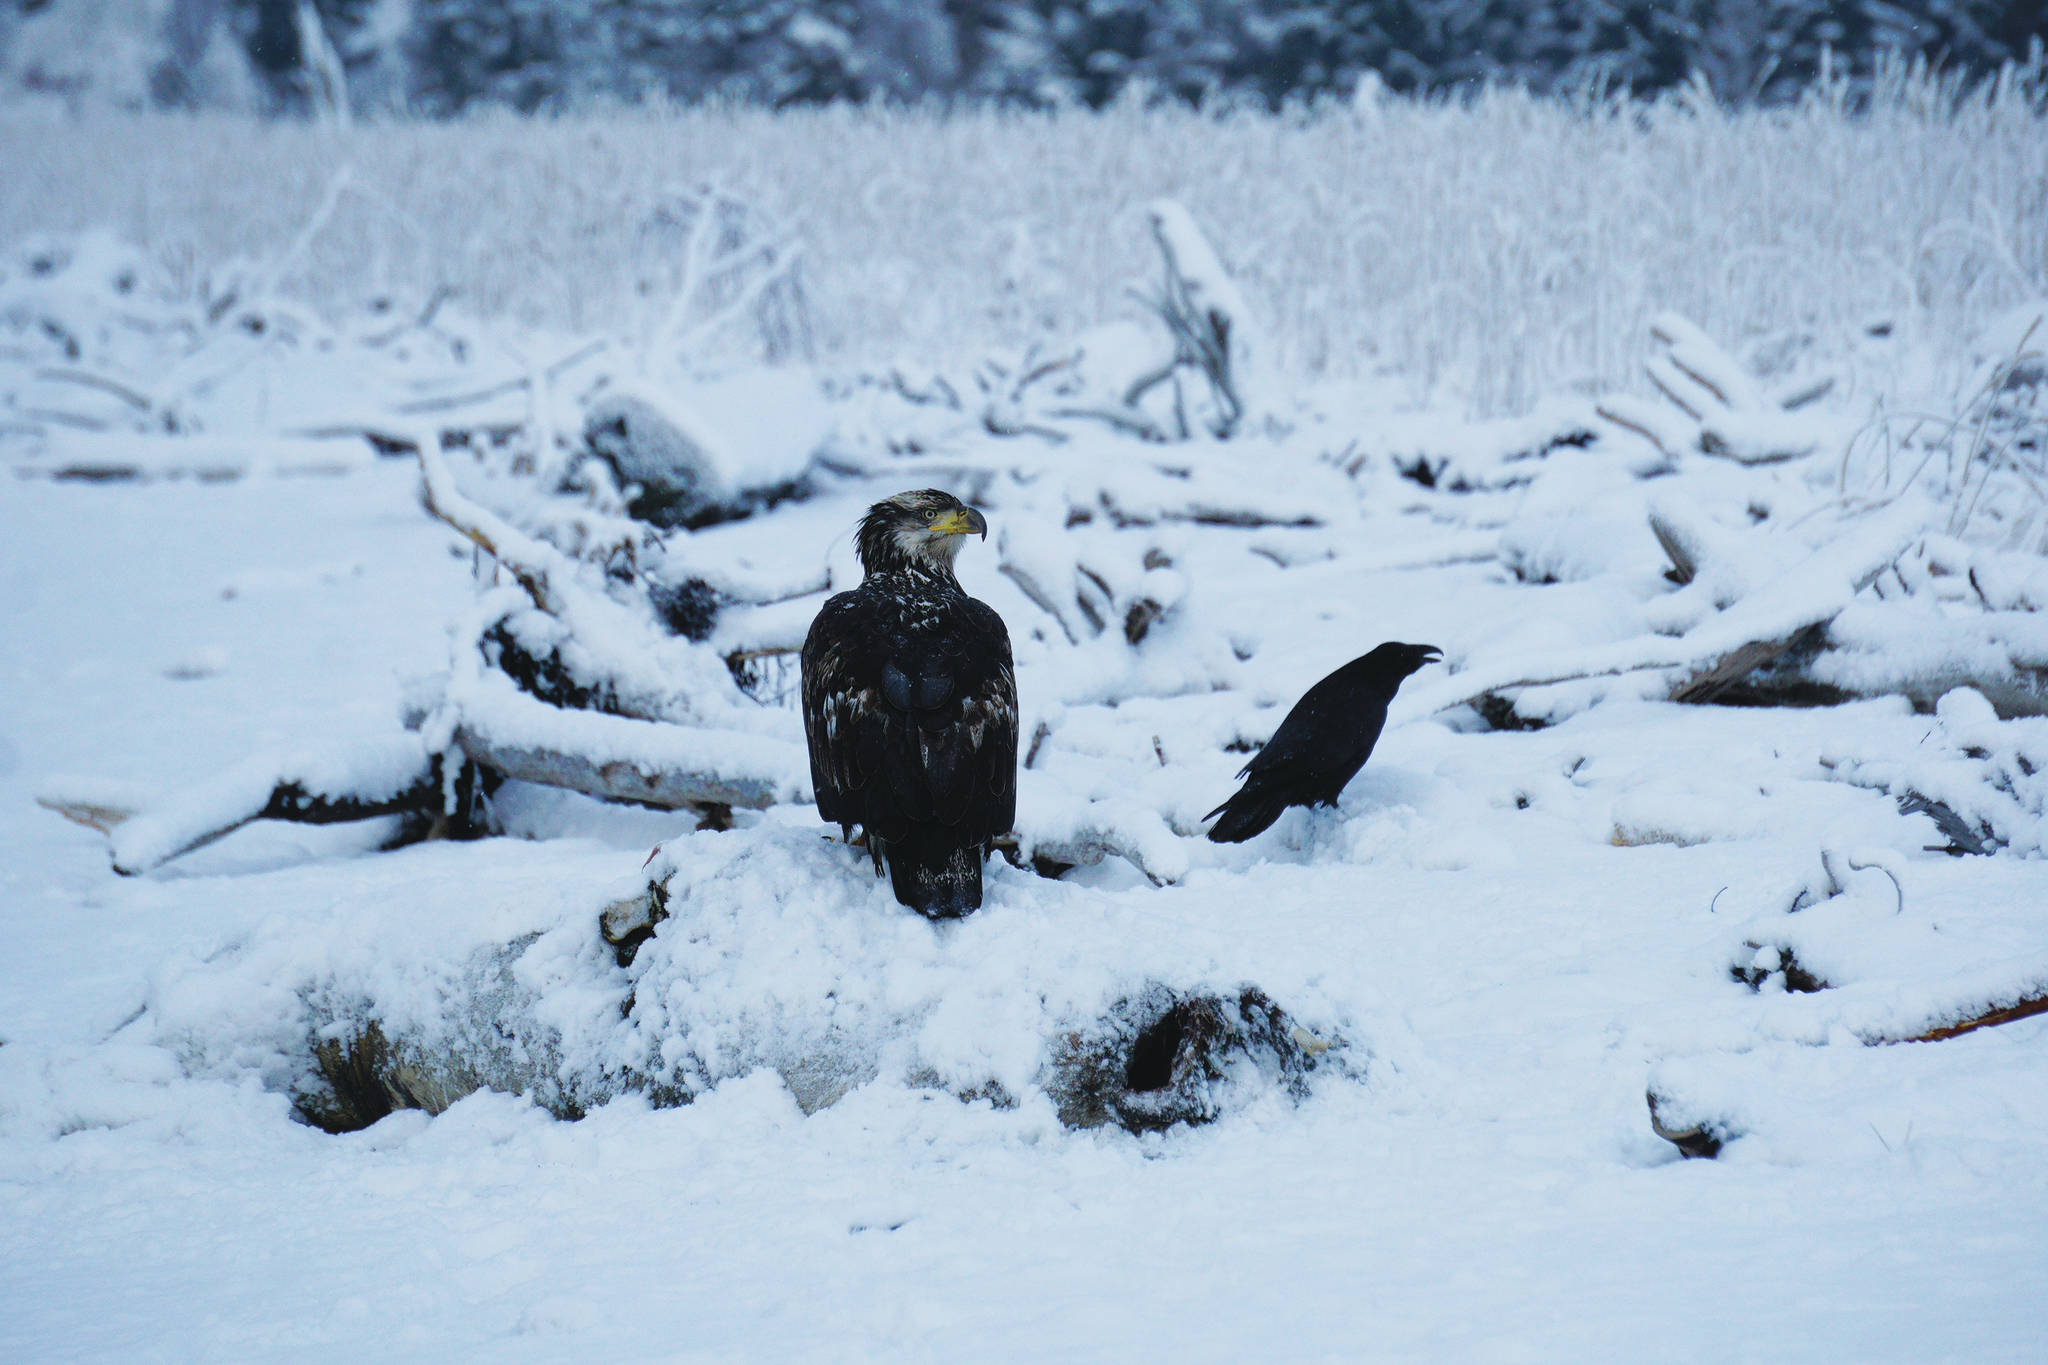 An immature bald eagle, left, and a raven sit on a driftwood log on Thursday, Dec. 10, 2020, at Mariner Park beach on the Homer Spit in Homer, Alaska. (Photo by Michael Armstrong/Homer News)